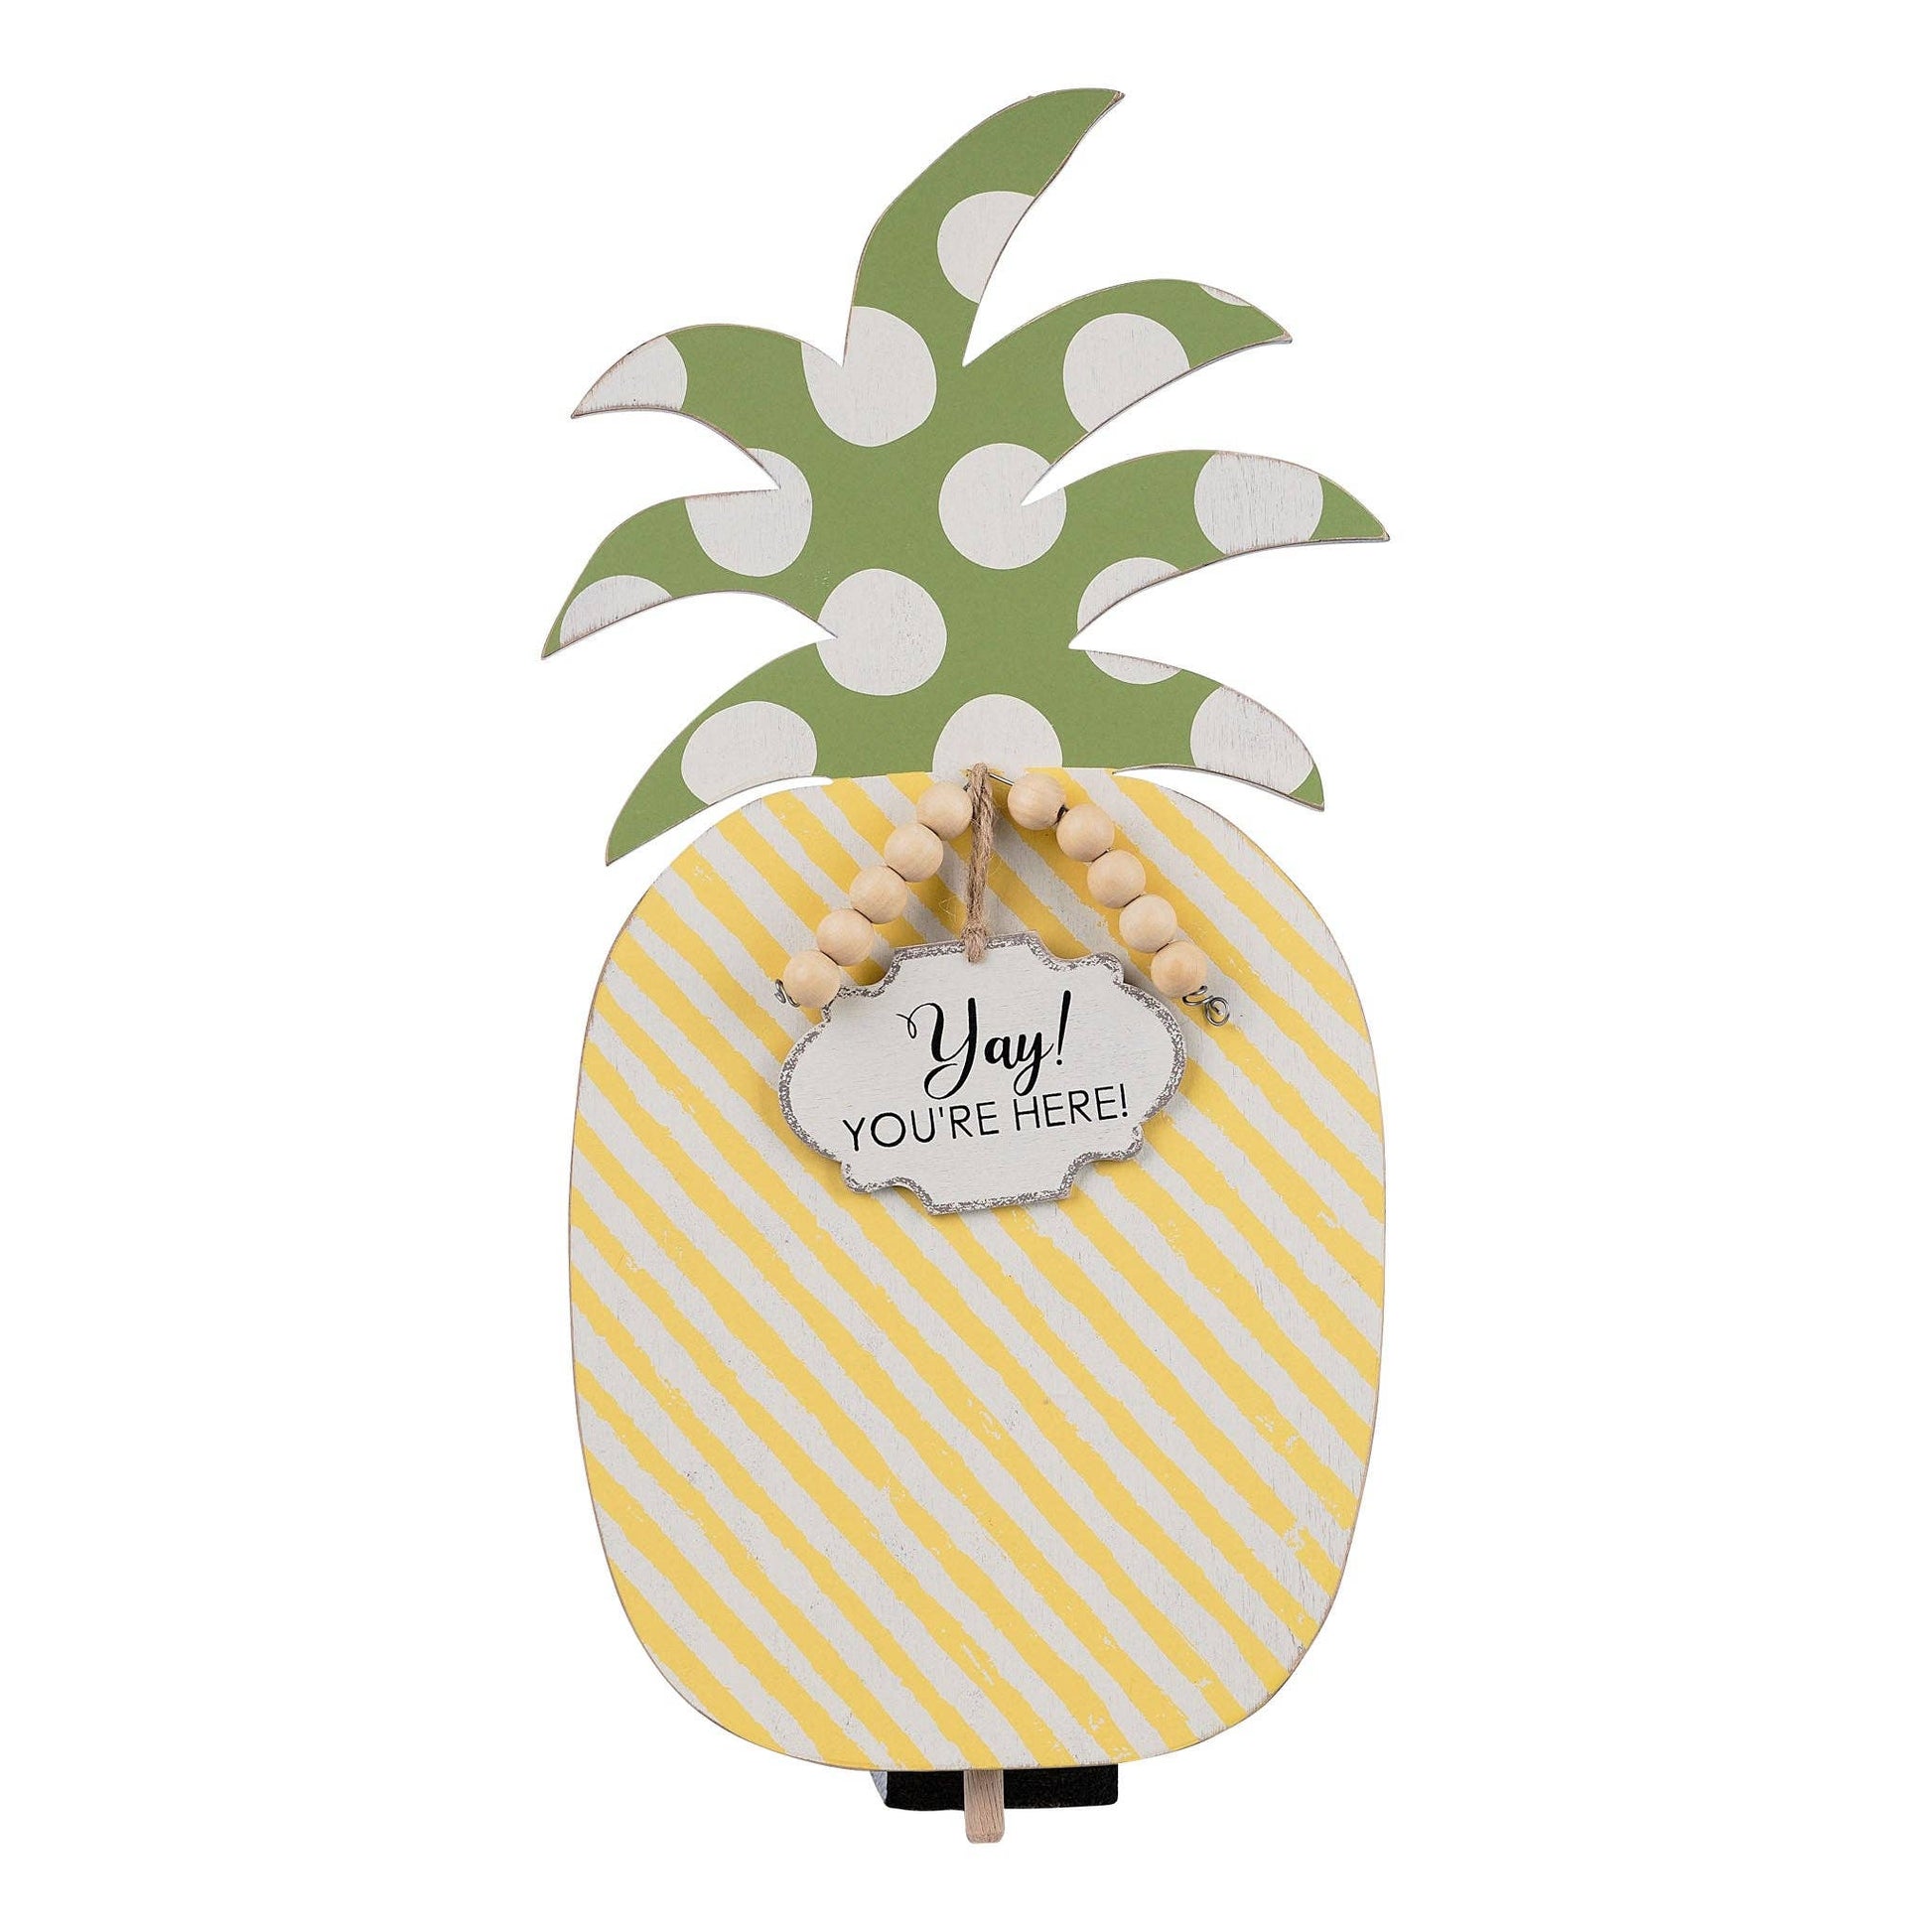 yay-youre-here-pineapple-topper-home-decor-glory-haus-Threadbare Gypsy Soul